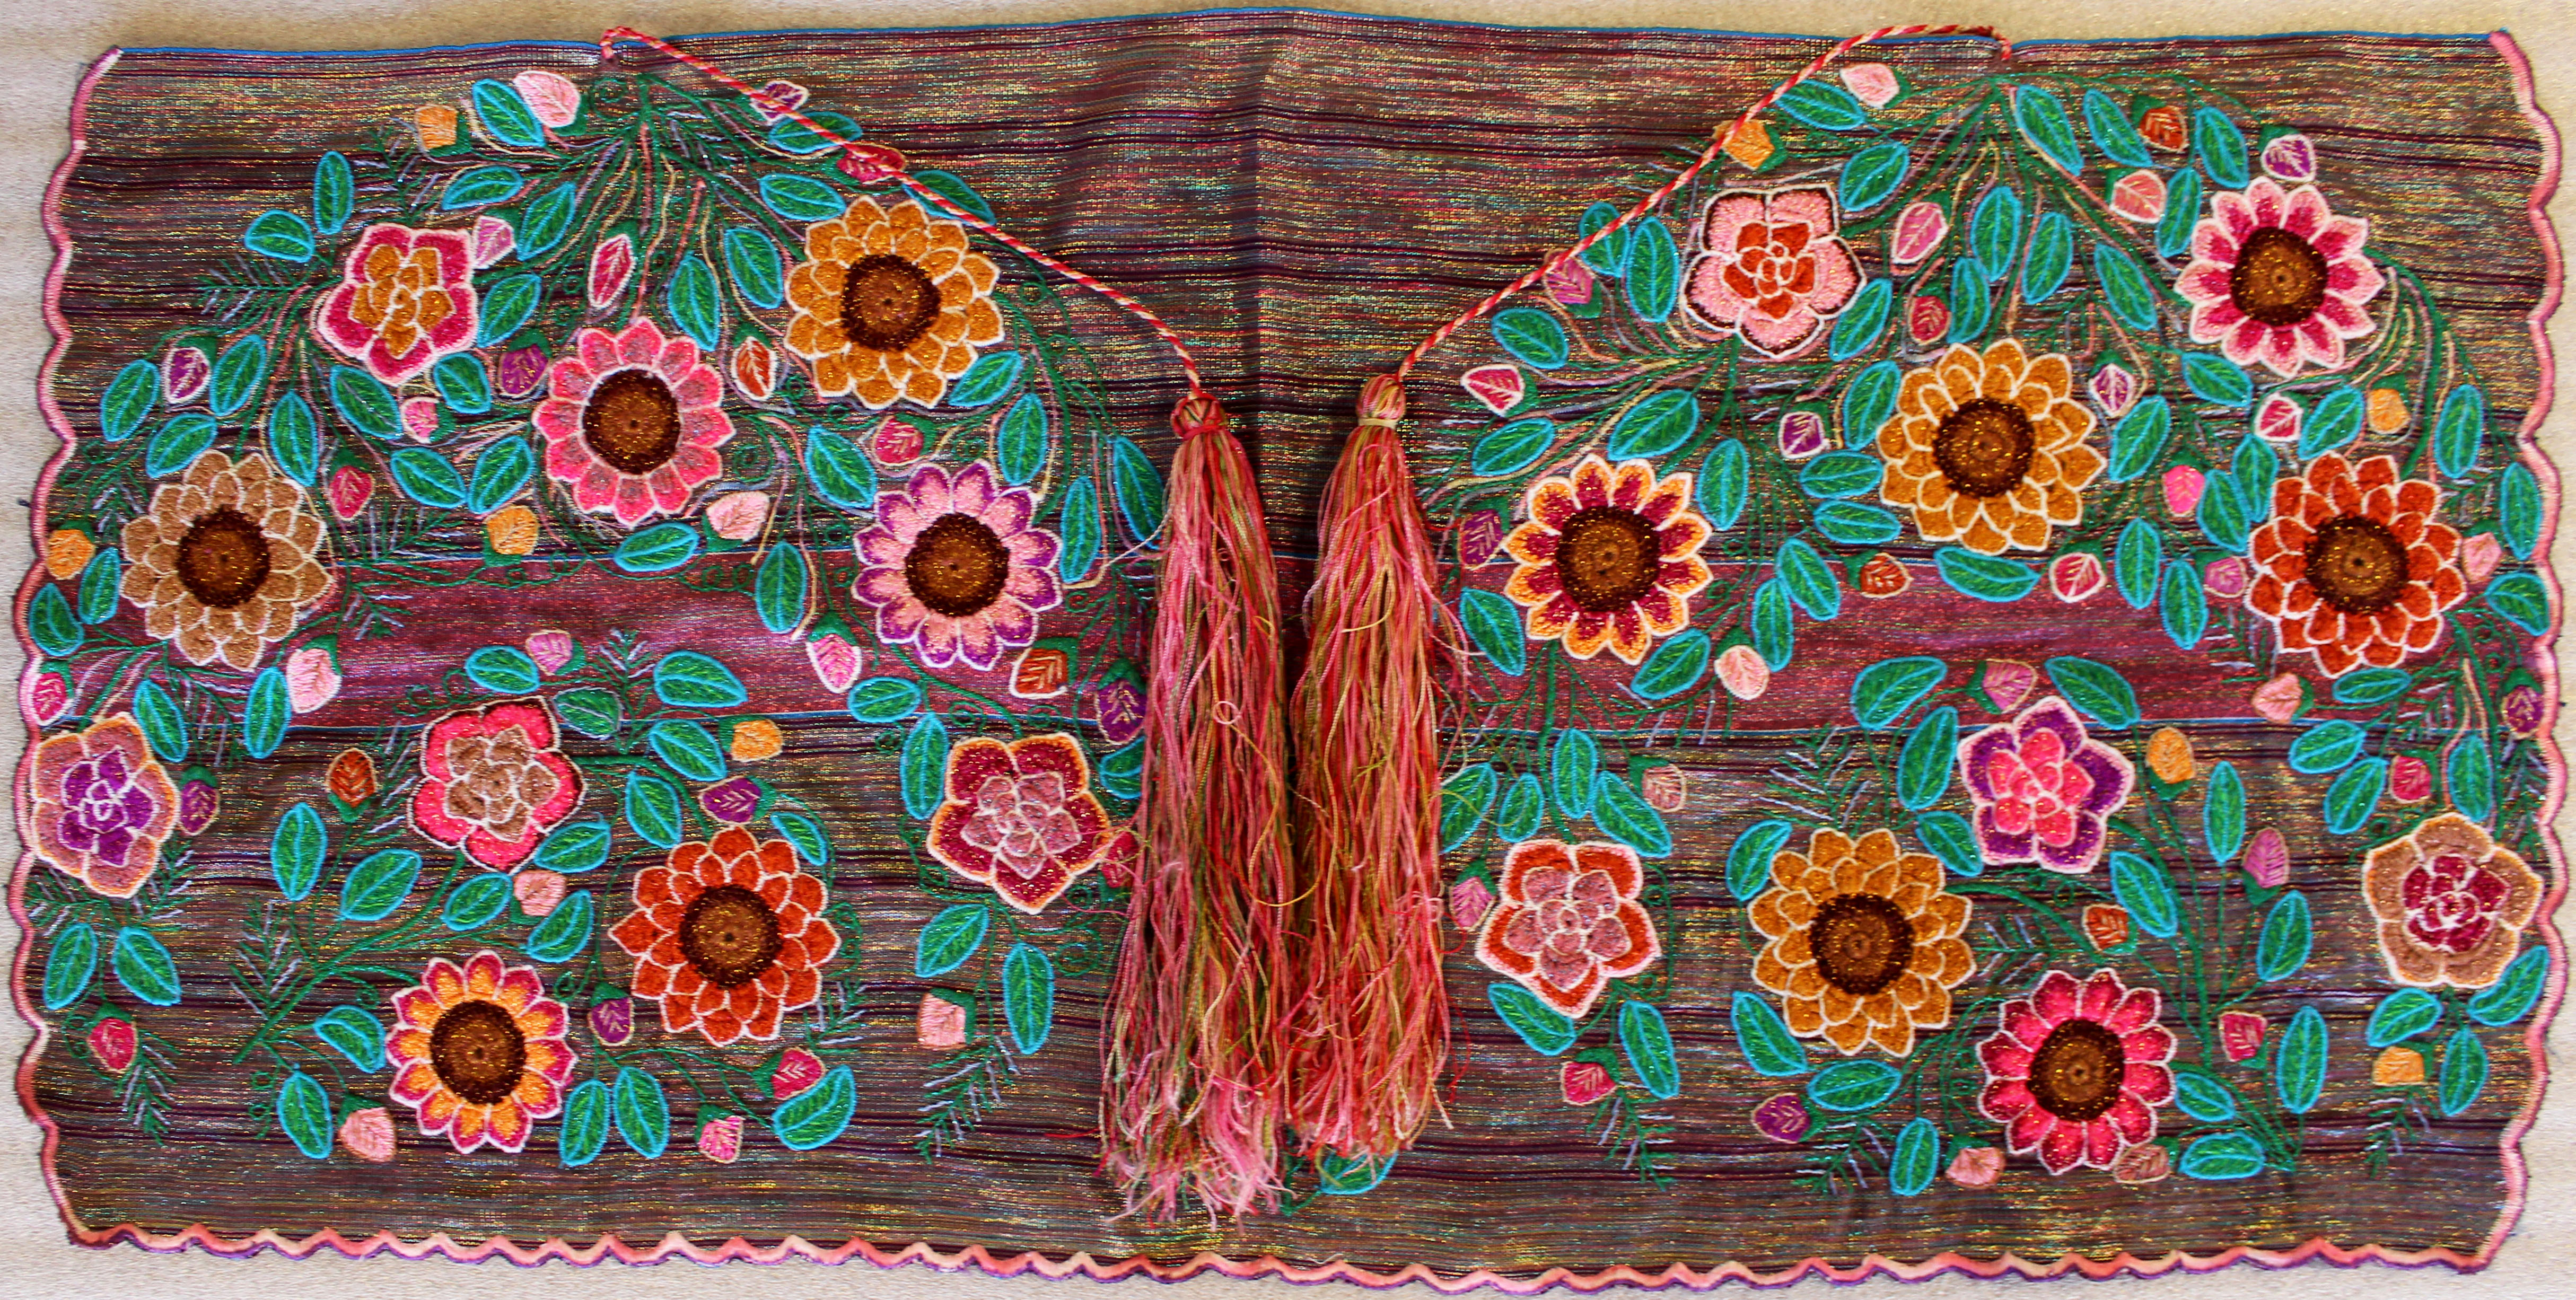 2020.02.01, rectangular shawl with pink striped background and large circles of round flowered embroidery